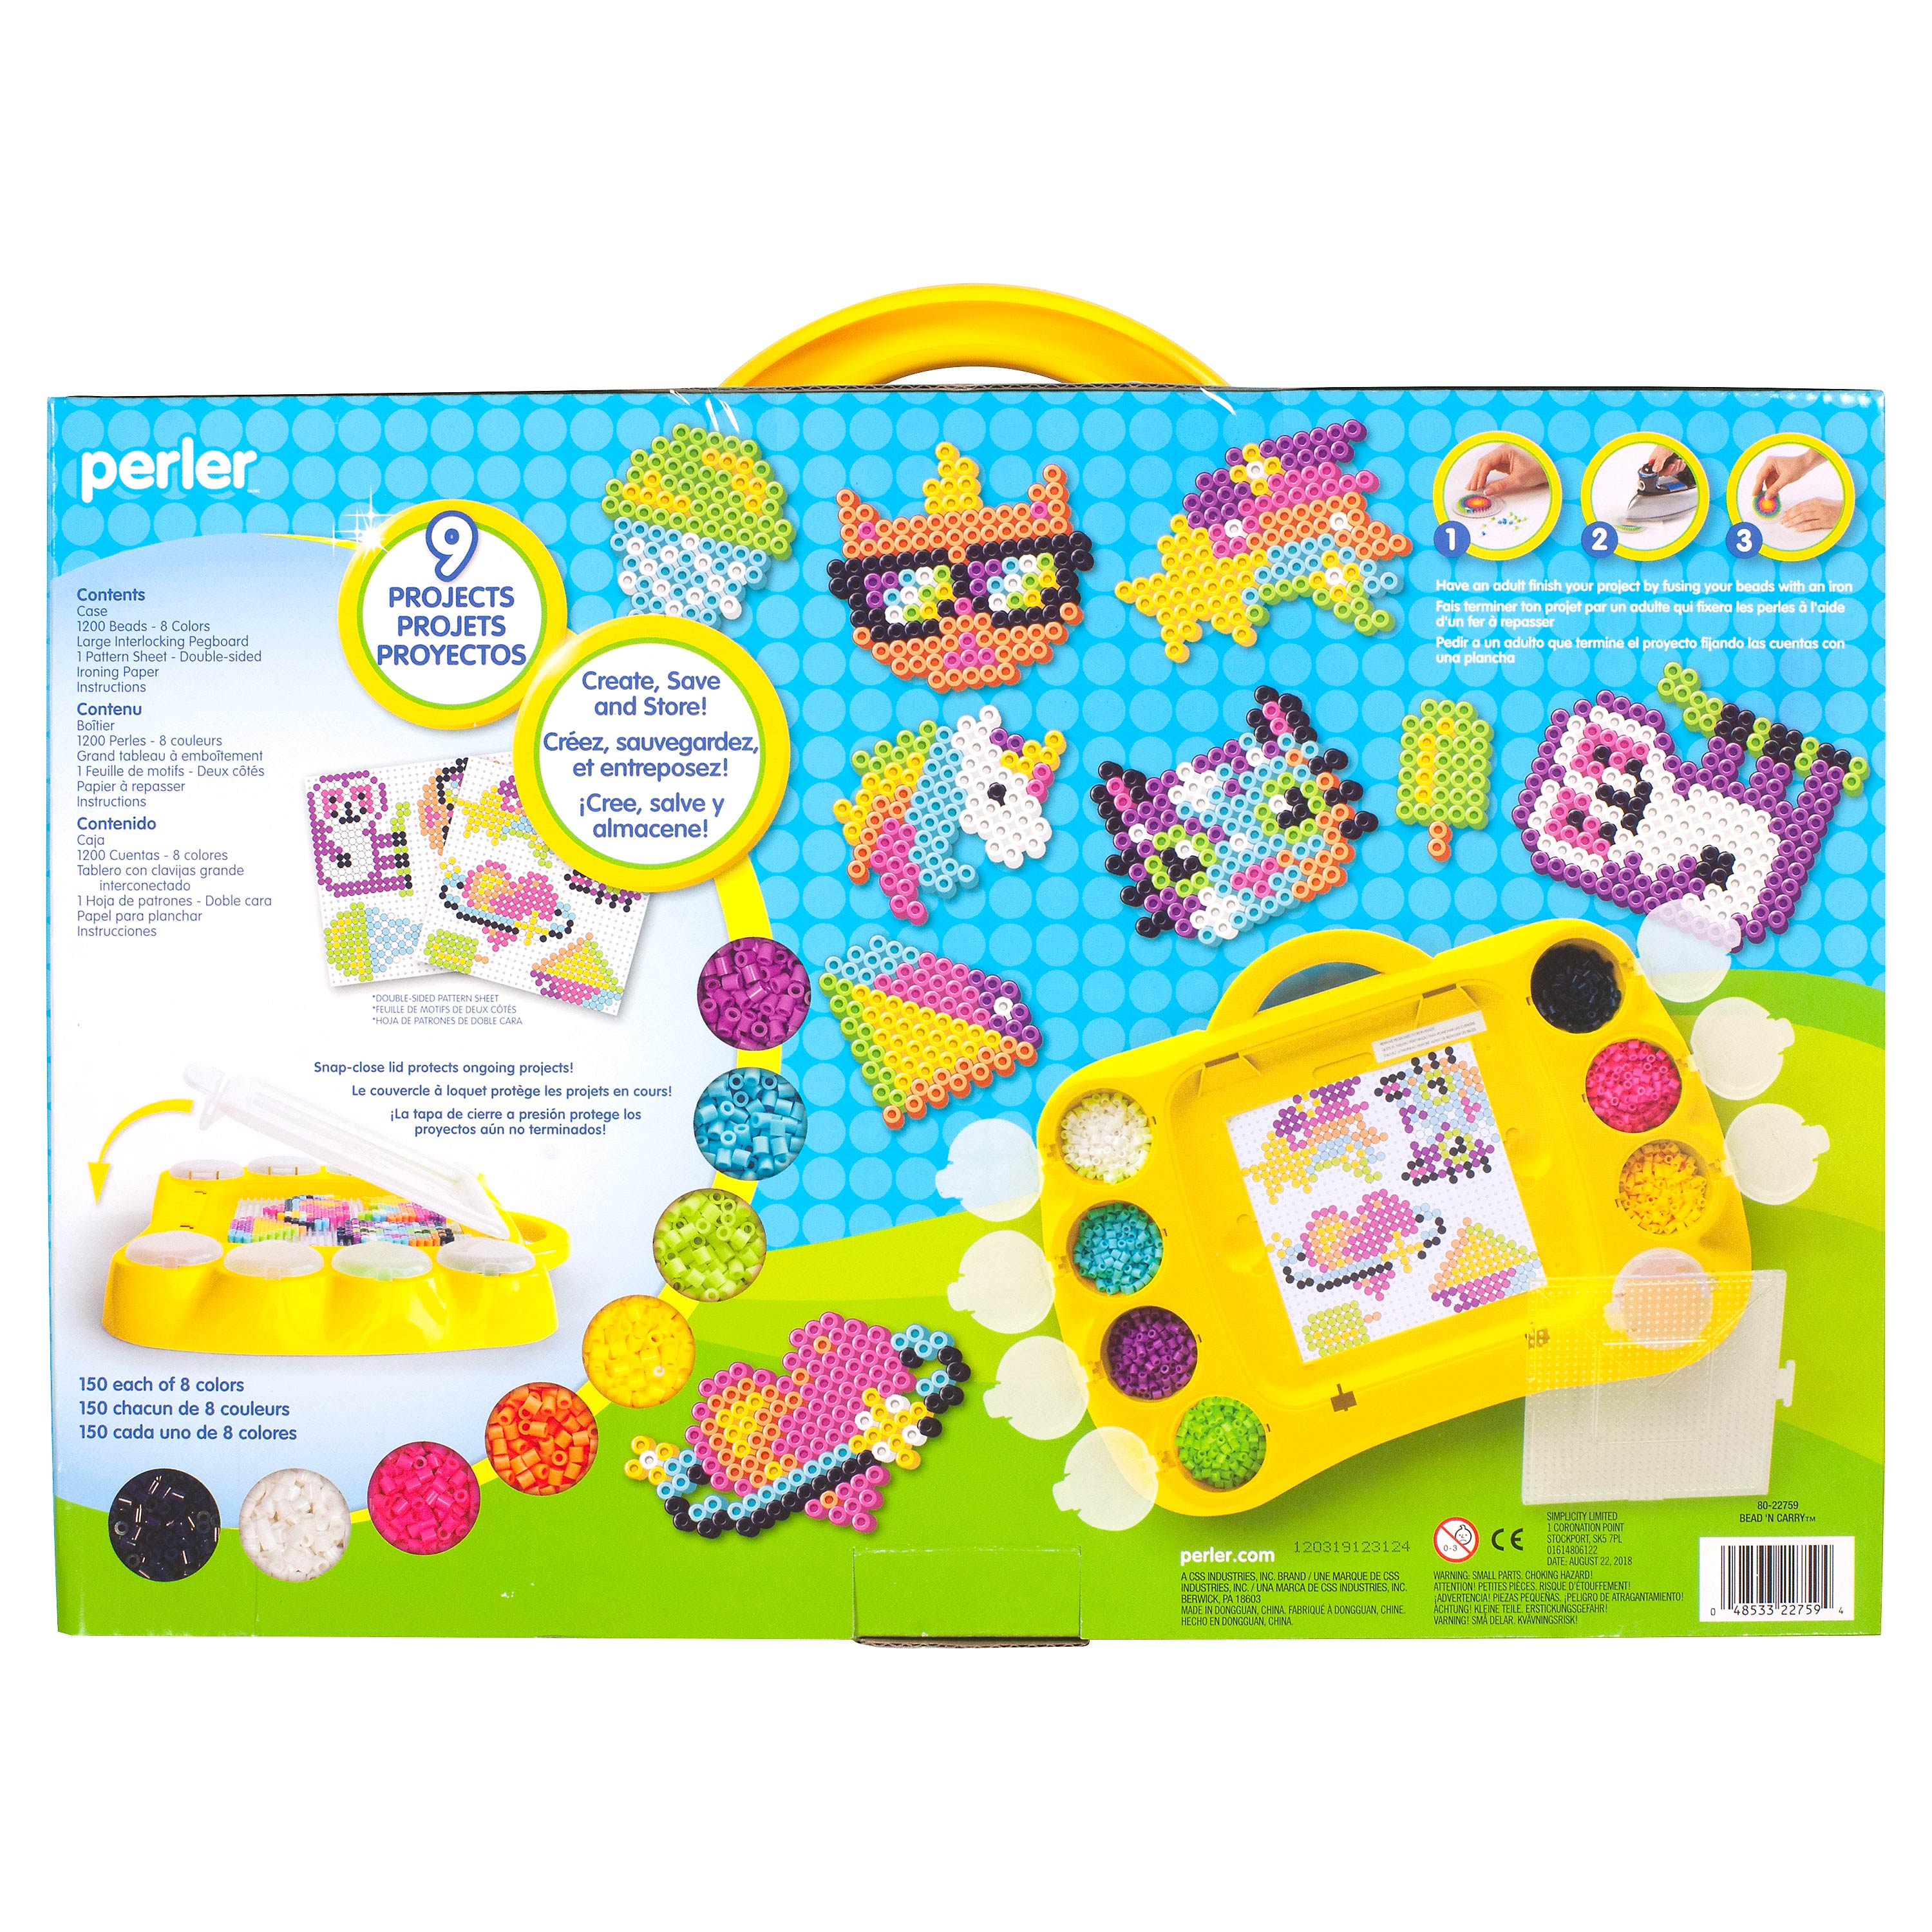 Perler Bead 'N Carry Fused Bead Activity Kit, Ages 6 and up, 1205 Pieces - image 5 of 5